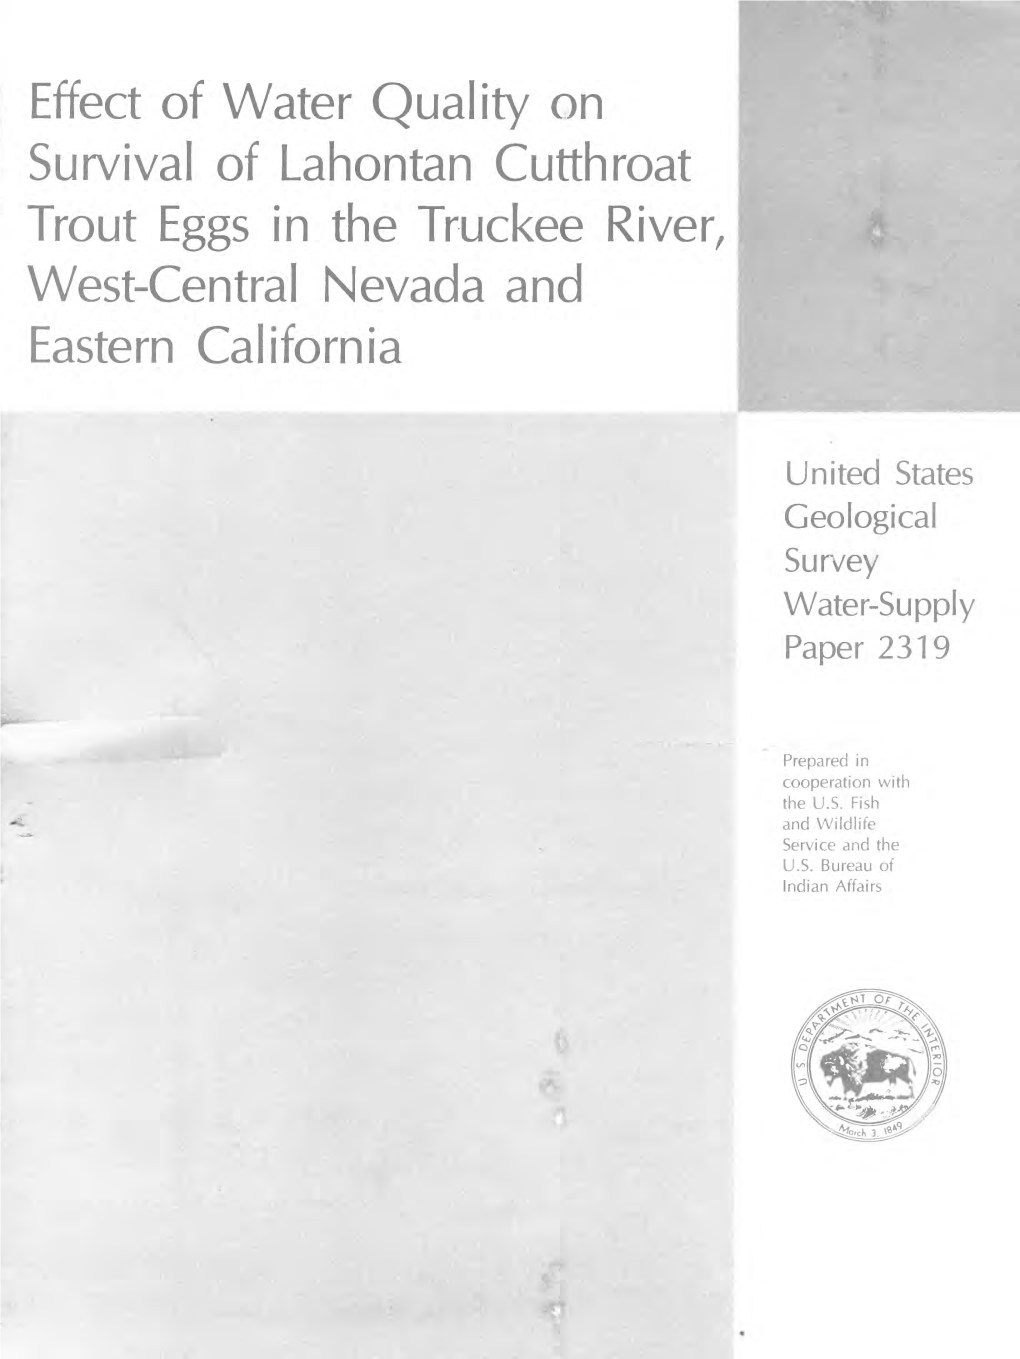 Effect of Water Quality on Survival of Lahontan Cutthroat Trout Eggs in the Truckee River, West-Central Nevada and Eastern California